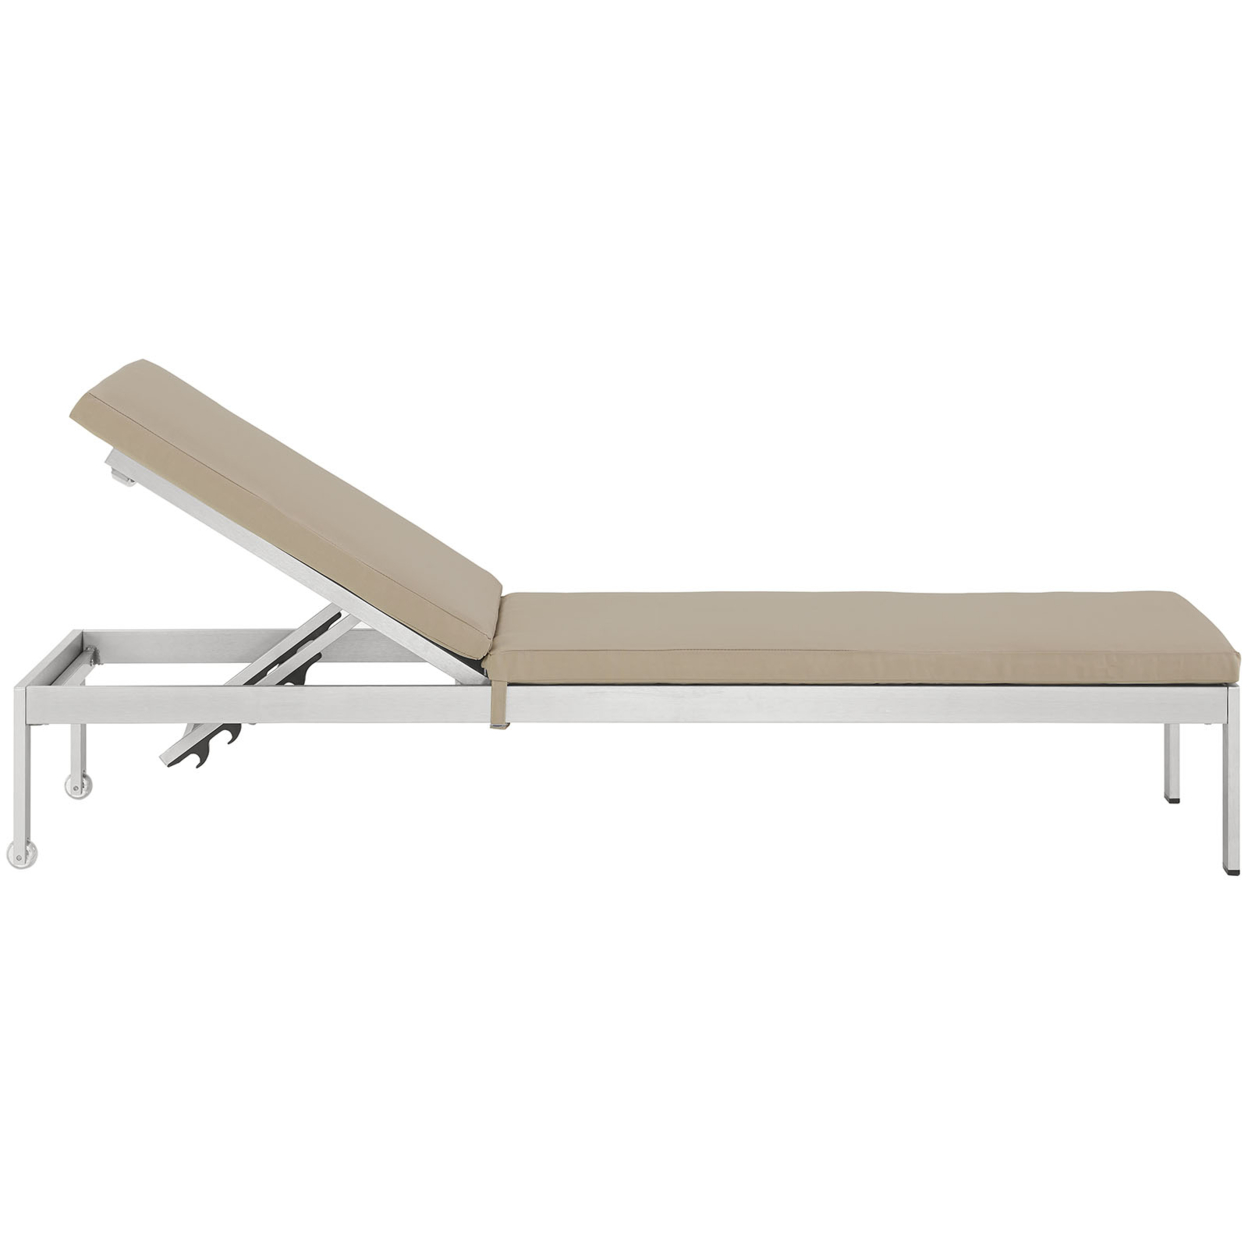 Shore Outdoor Patio Aluminum Chaise With Cushions, Silver Beige